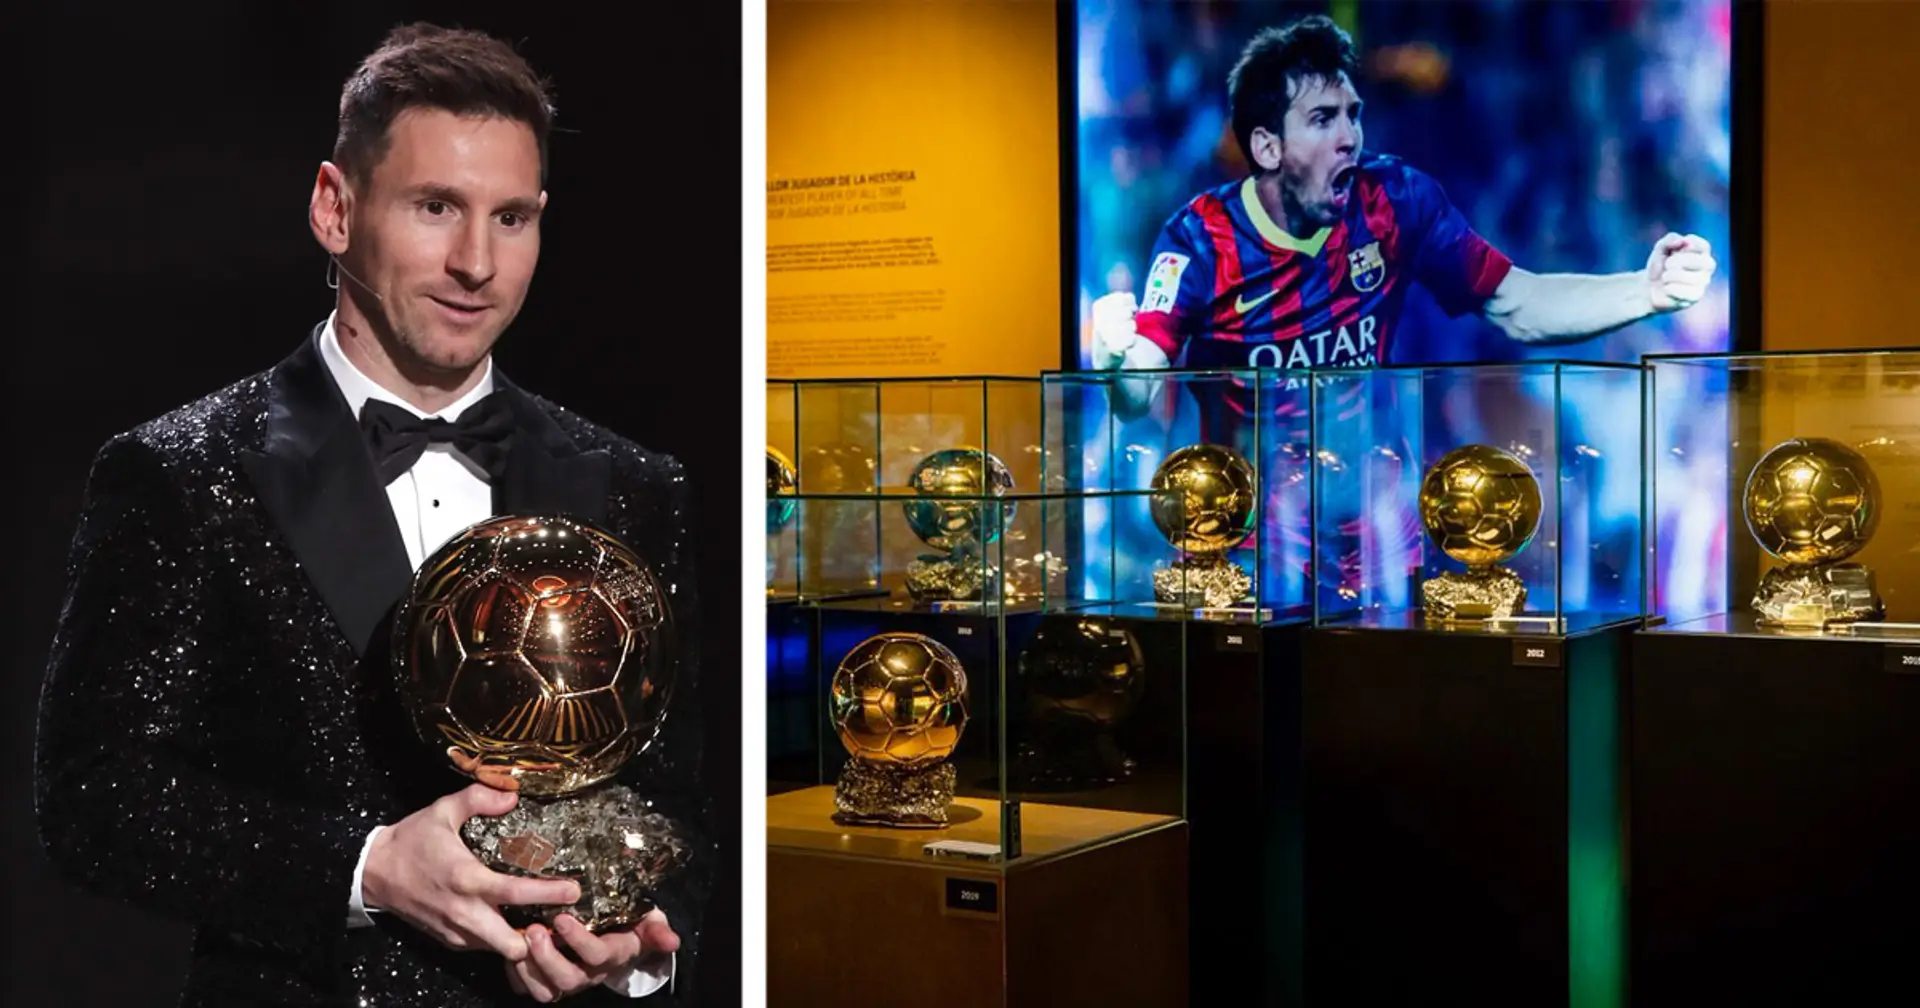 Barca reportedly planning to have Messi's 7th Ballon d'or at their museum